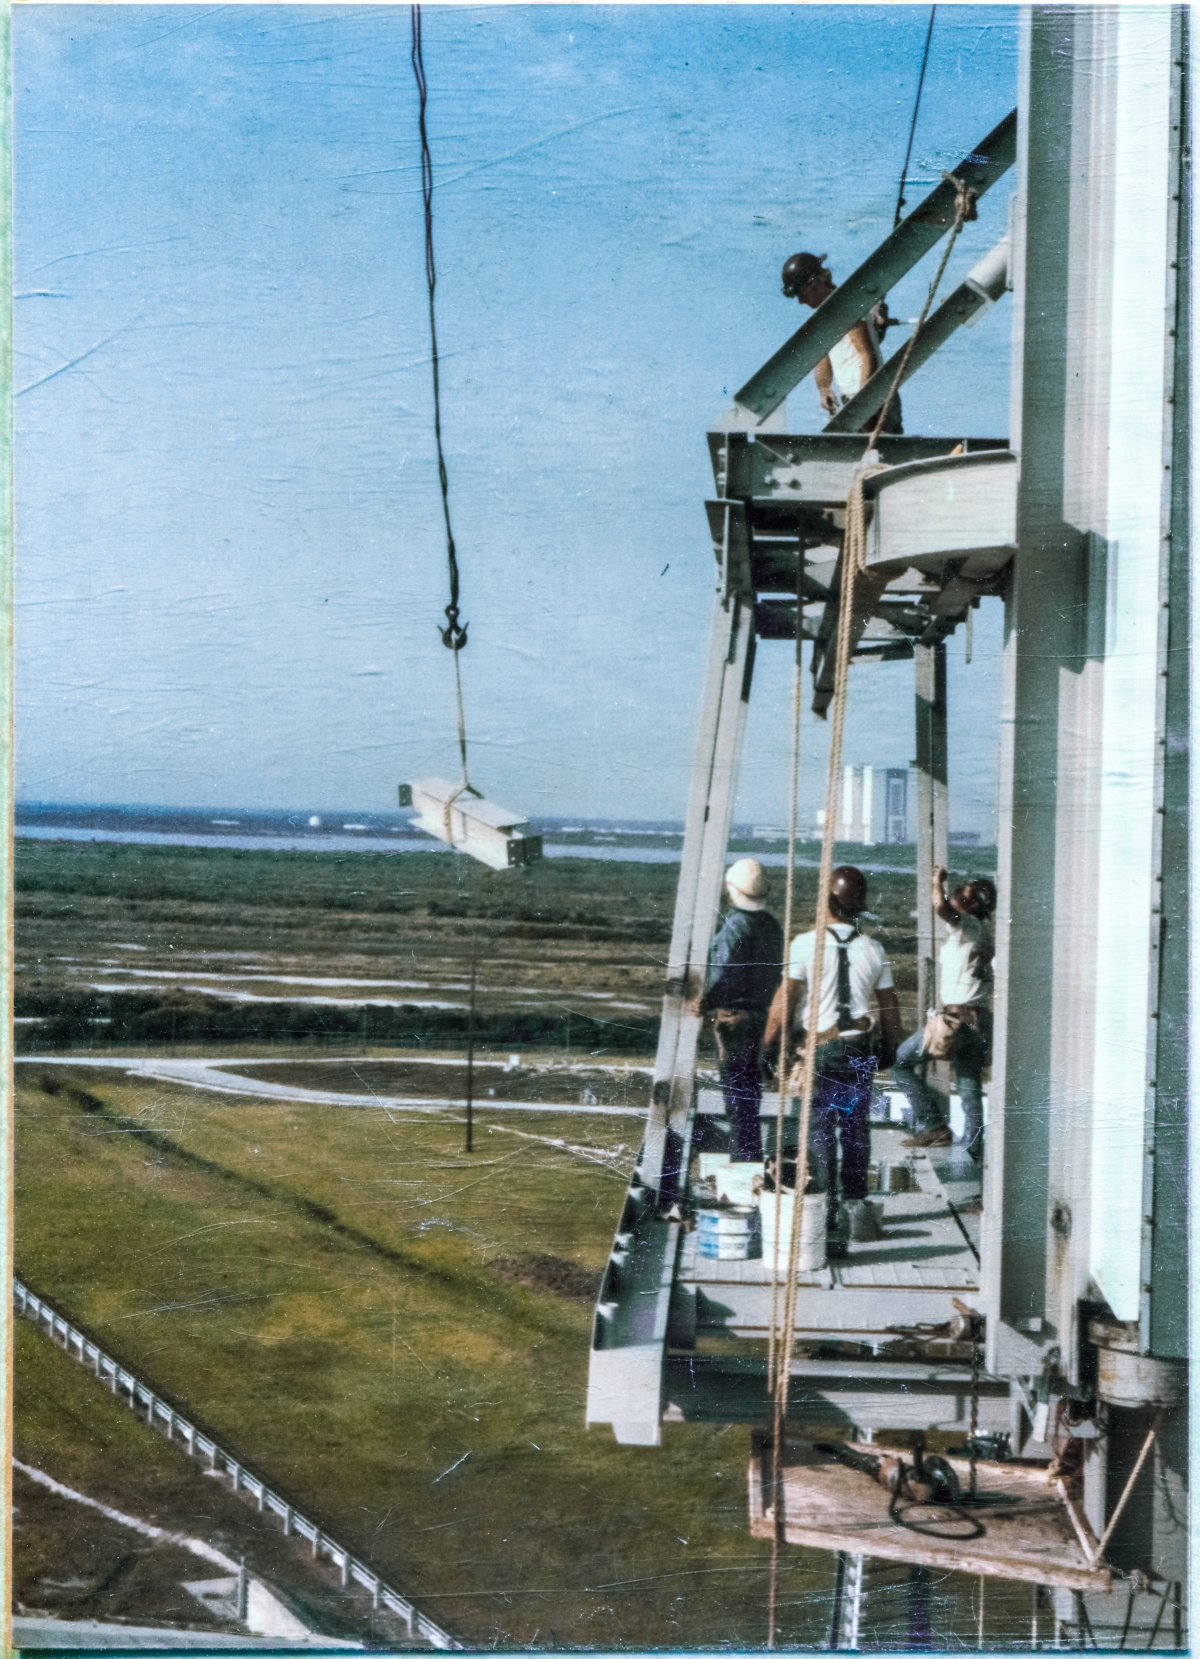 Image 058. Union Ironworkers from Local 808 working for Ivey's Steel Erectors at Space Shuttle Launch Complex 39-B, Kennedy Space Center, Florida, prepare to receive an inbound steel beam, which will be attached to the reworked PBK & Contingency Platform which they are standing on, and above, out in front of the face of the  Rotating Service Structure, an unimpeded 80 foot free drop above the concrete surface of the Pad Deck, beneath them. There is a story with the rework of this platforming, and it is not a pleasant one. Construction work, and Operations work too, in areas like this, is never to be taken for granted, and you must never let your guard down, lest you become an unwilling part of the “contingency” yourself. Photo by James MacLaren.